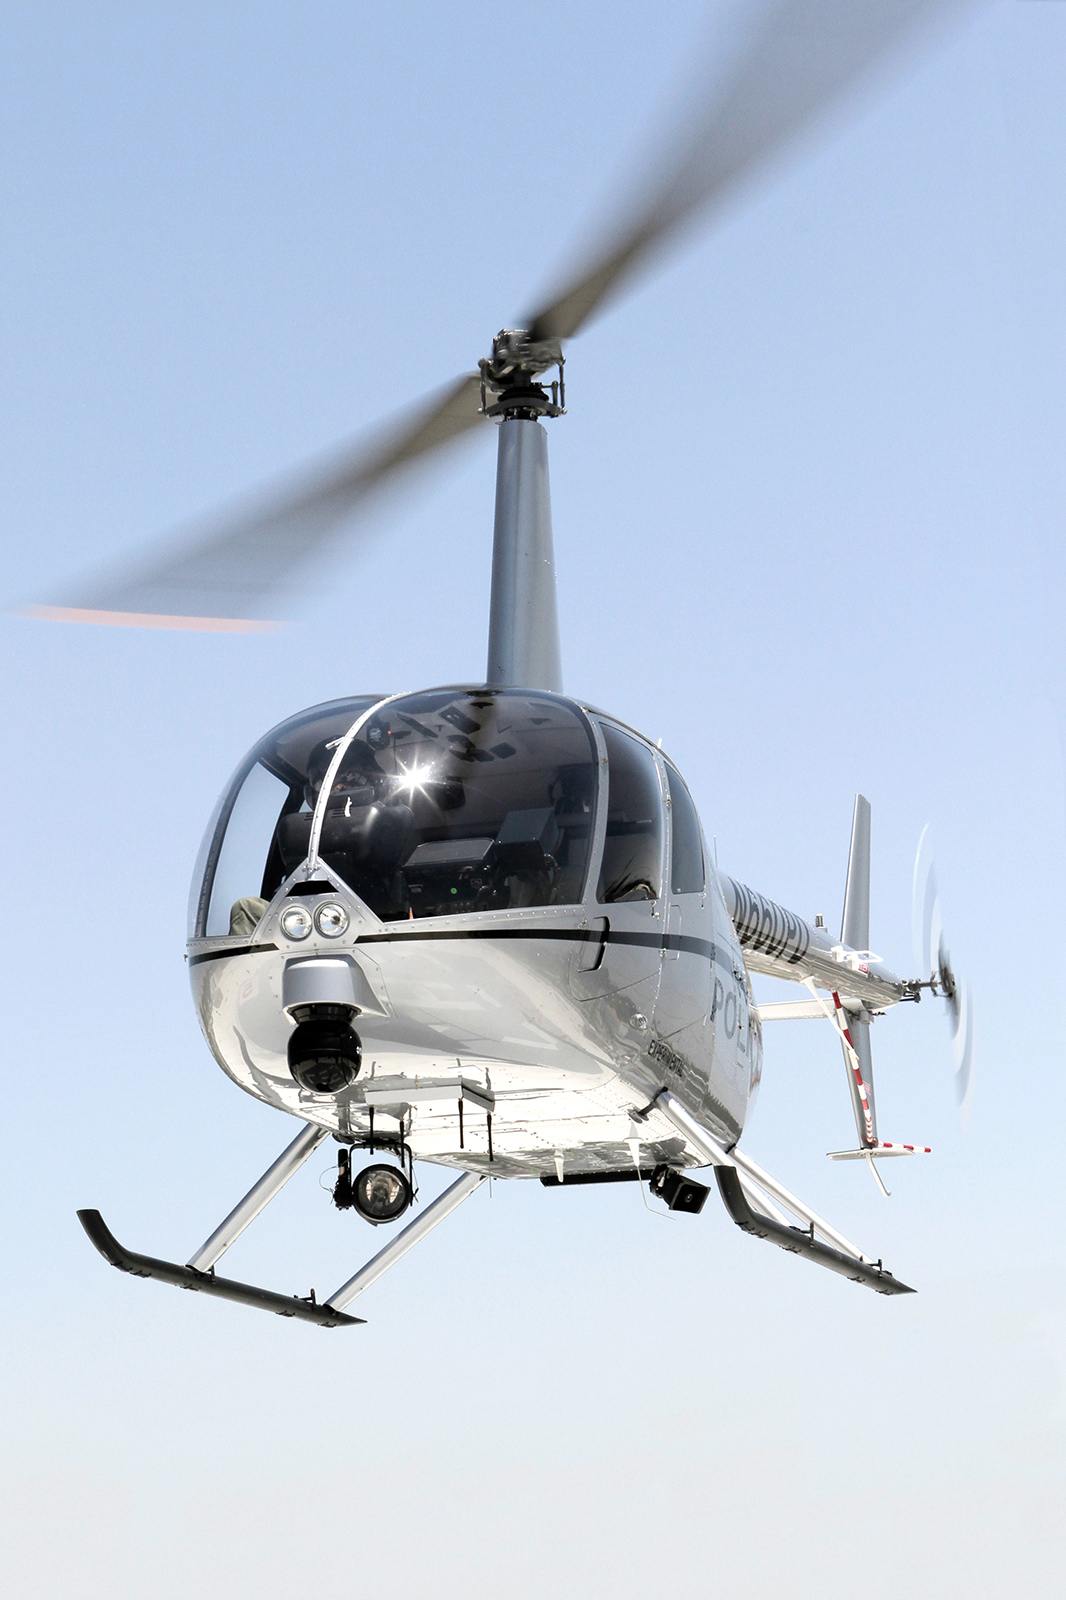 R66 Police Helicopter – RHC Continues Success of R66 Line